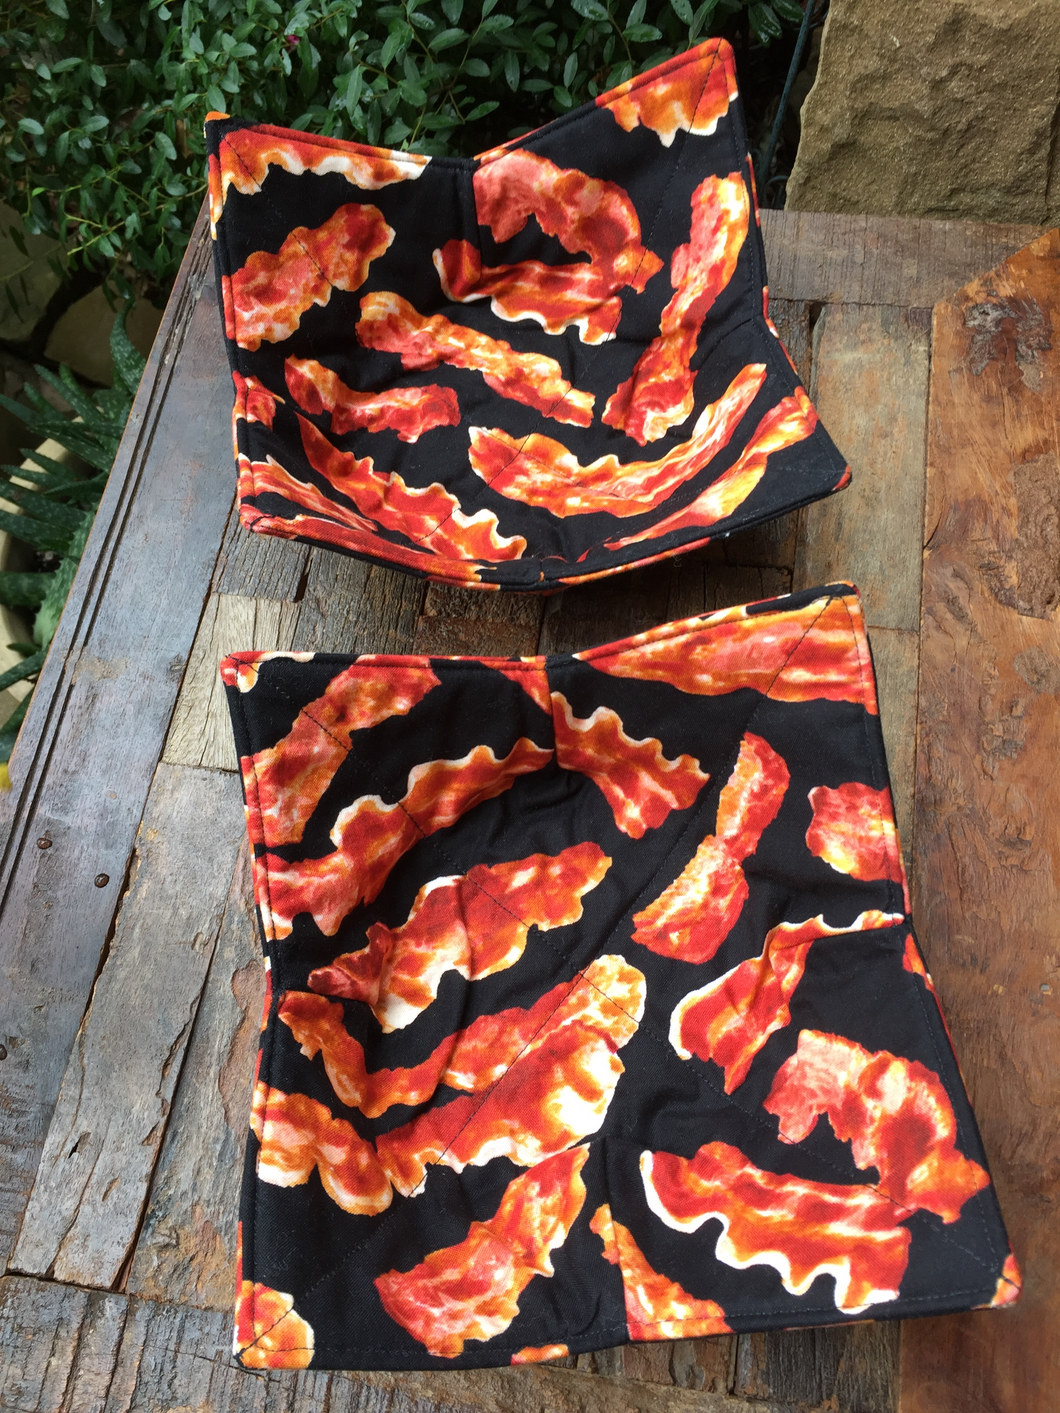 Microwave Cozy Bowl Set - Bacon - Set Of Two Microwave Cozies